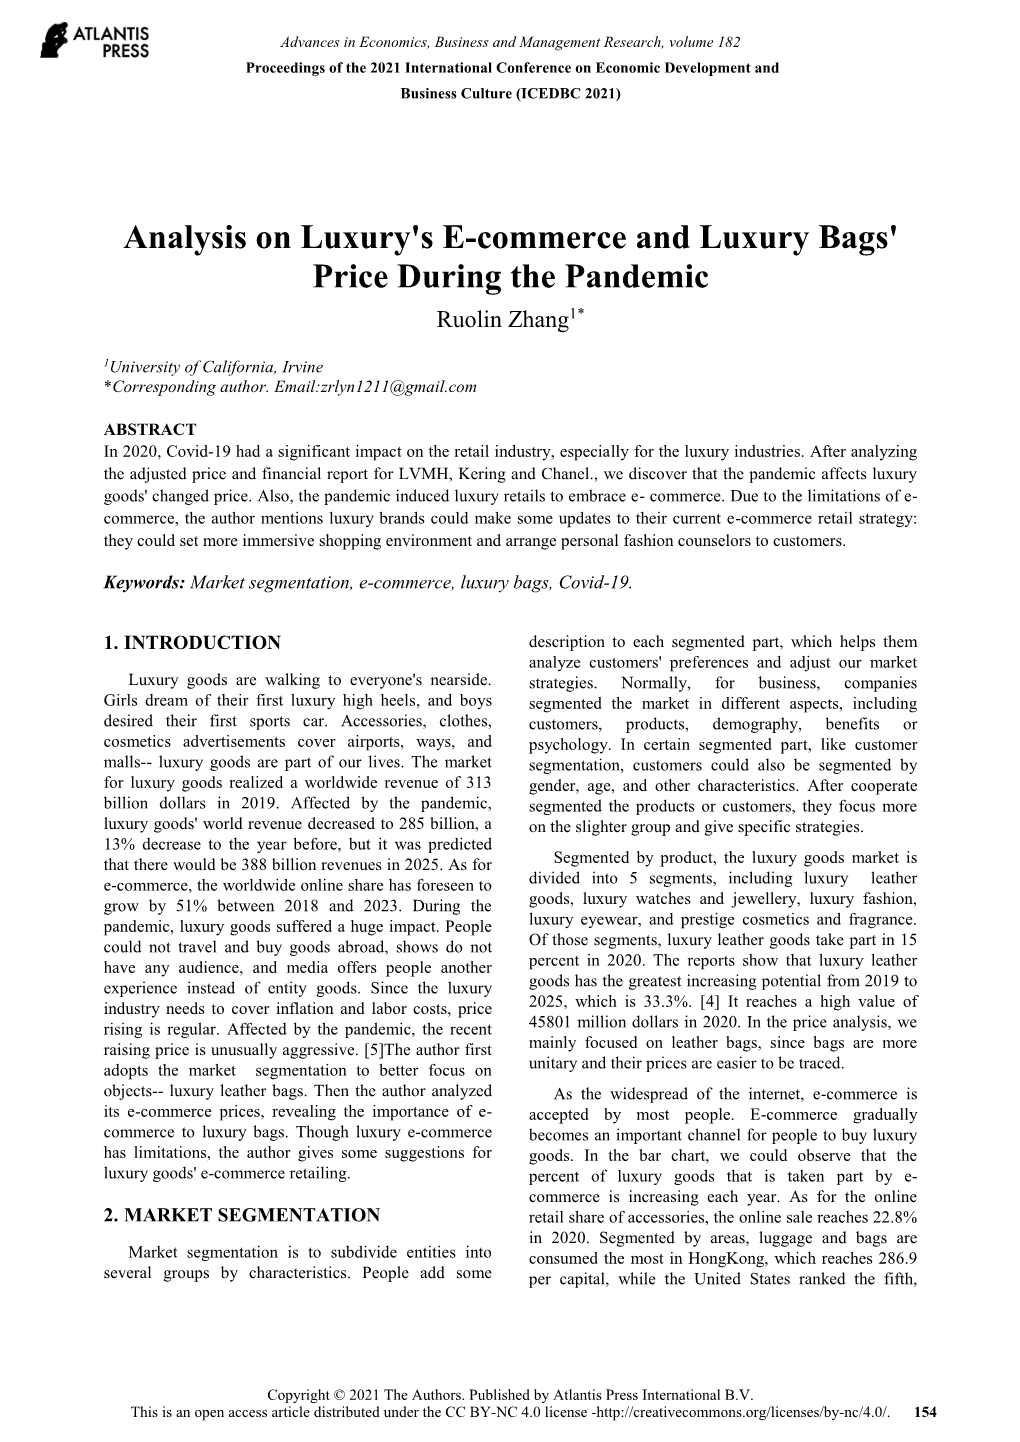 Analysis on Luxury's E-Commerce and Luxury Bags' Price During the Pandemic Ruolin Zhang1*